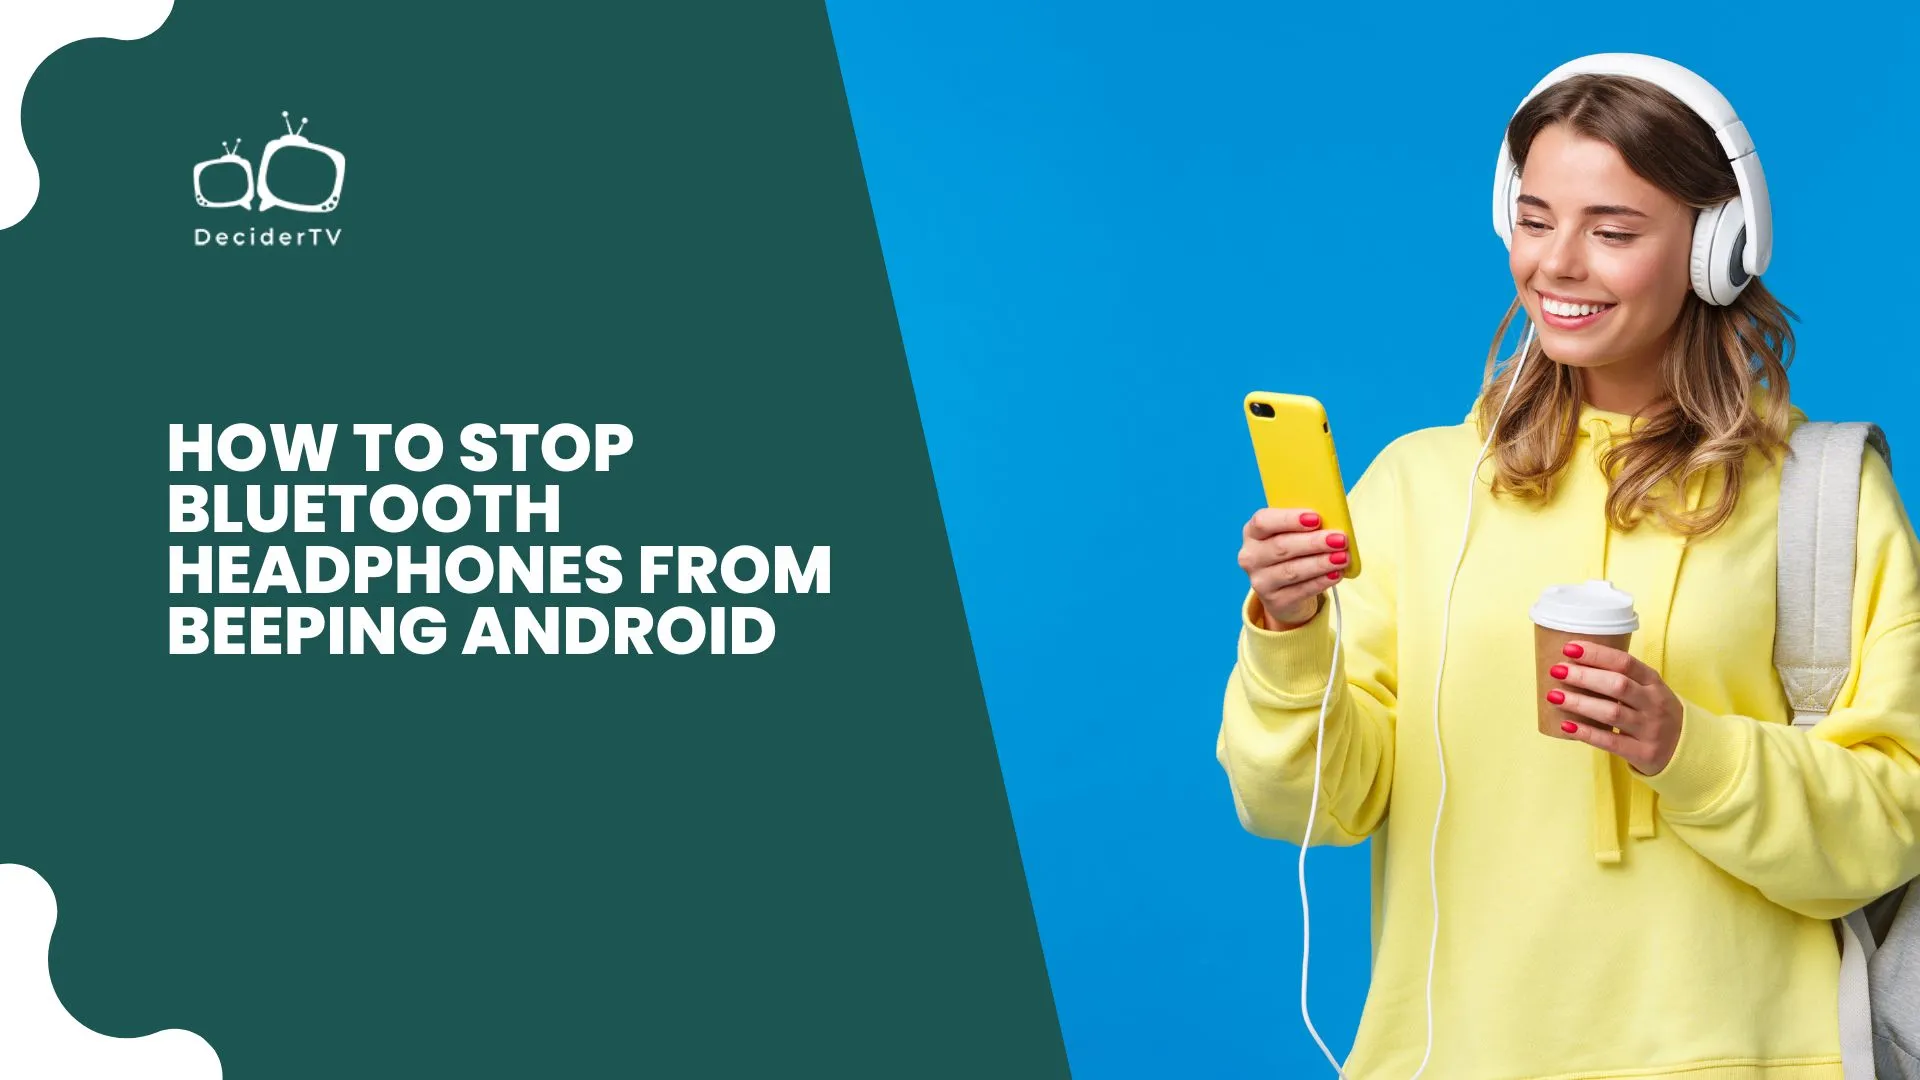 How to Stop Bluetooth Headphones from Beeping Android